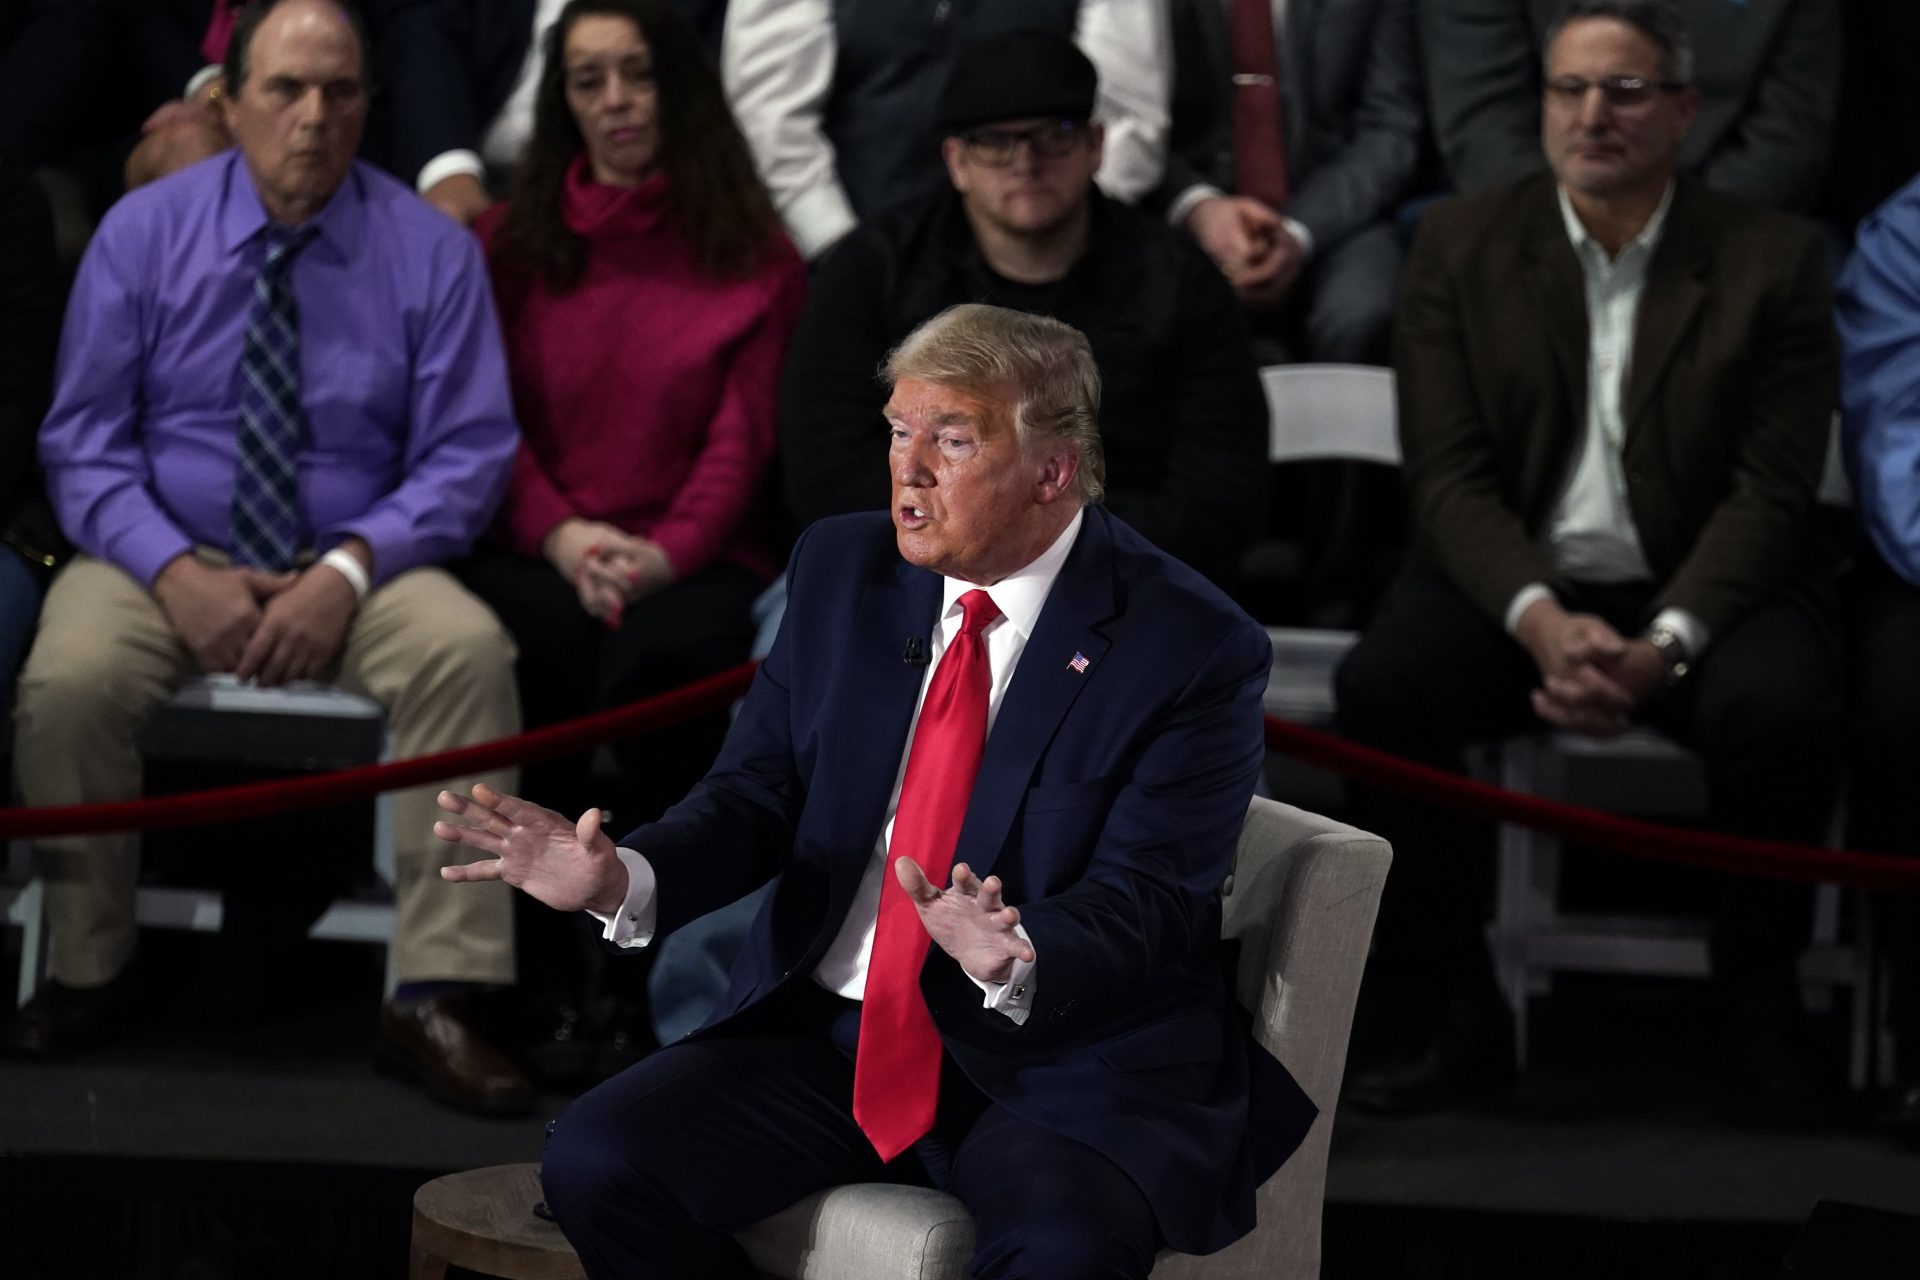 President Donald Trump speaks during a FOX News Channel town hall at the Scranton Cultural Center, Thursday, March 5, 2020, in Scranton, Pa.